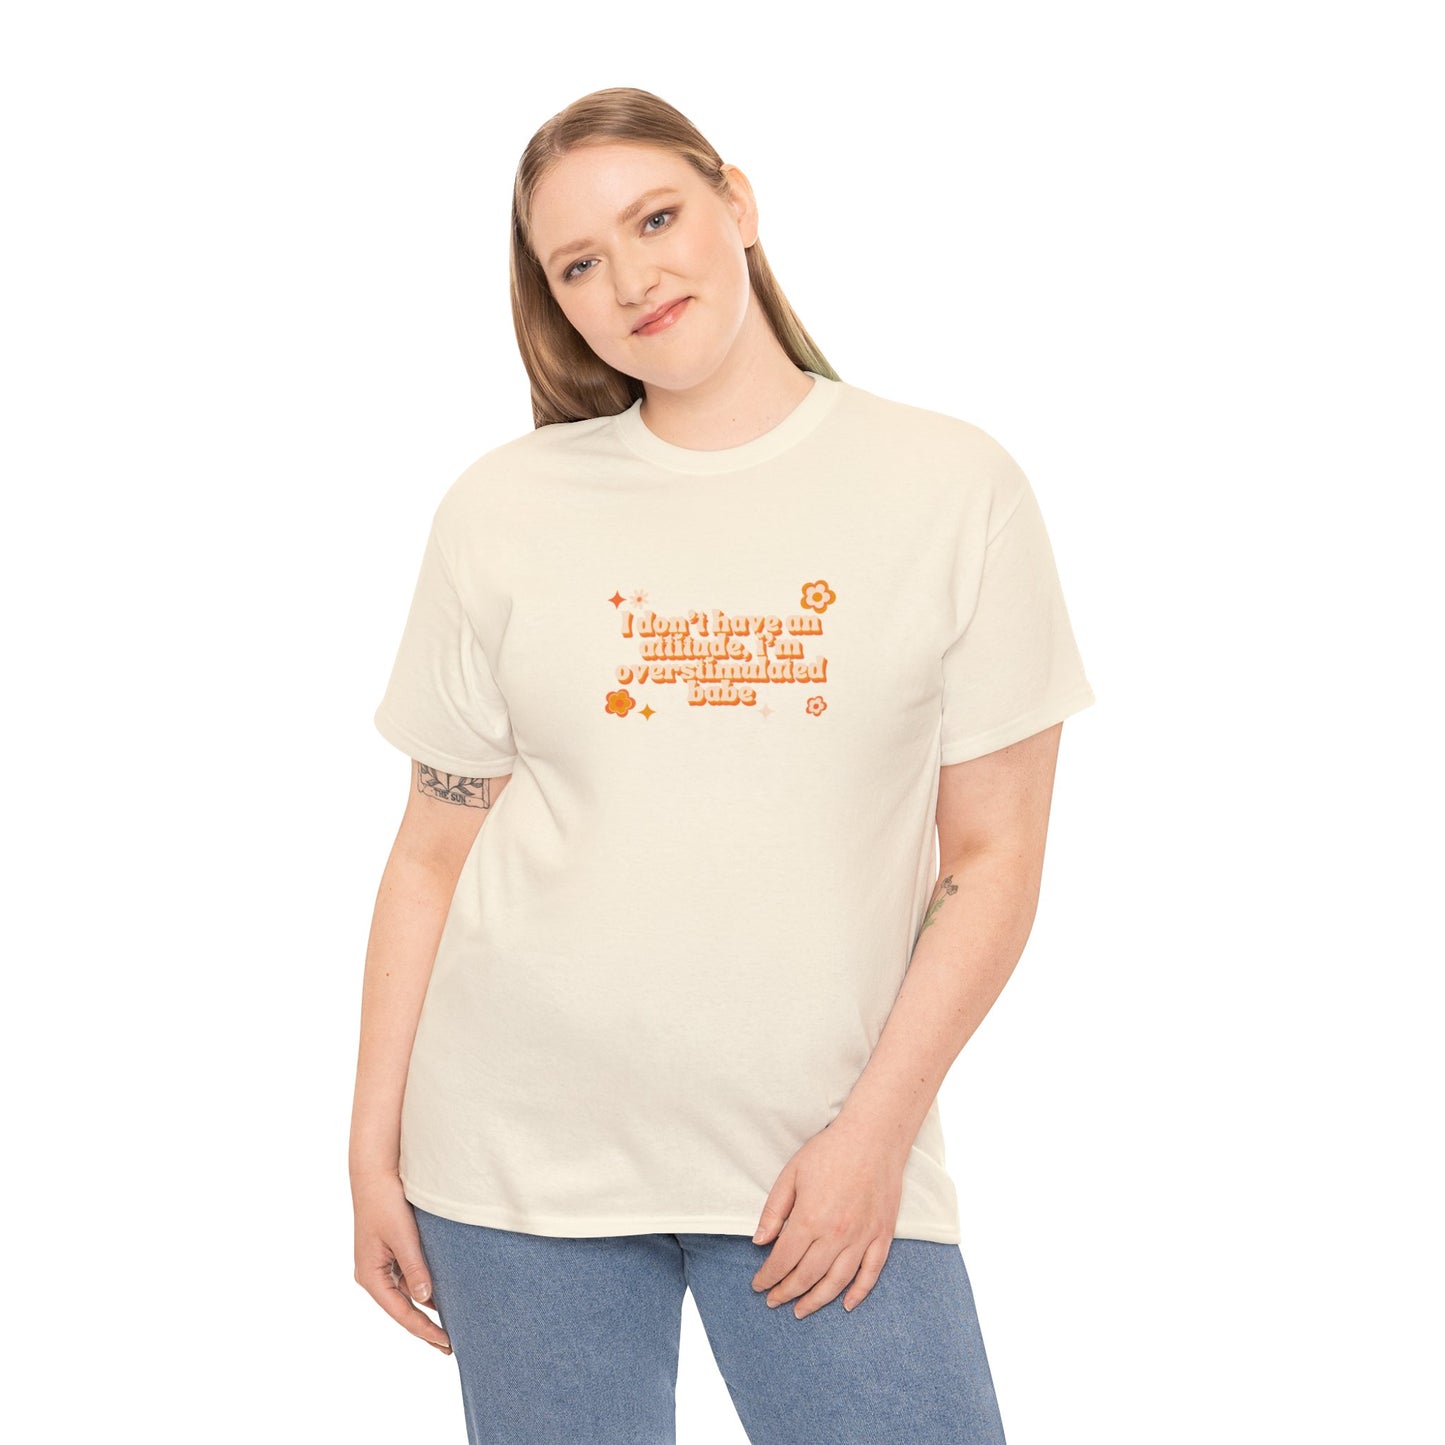 OVERSTIMULATED t-shirt - adult